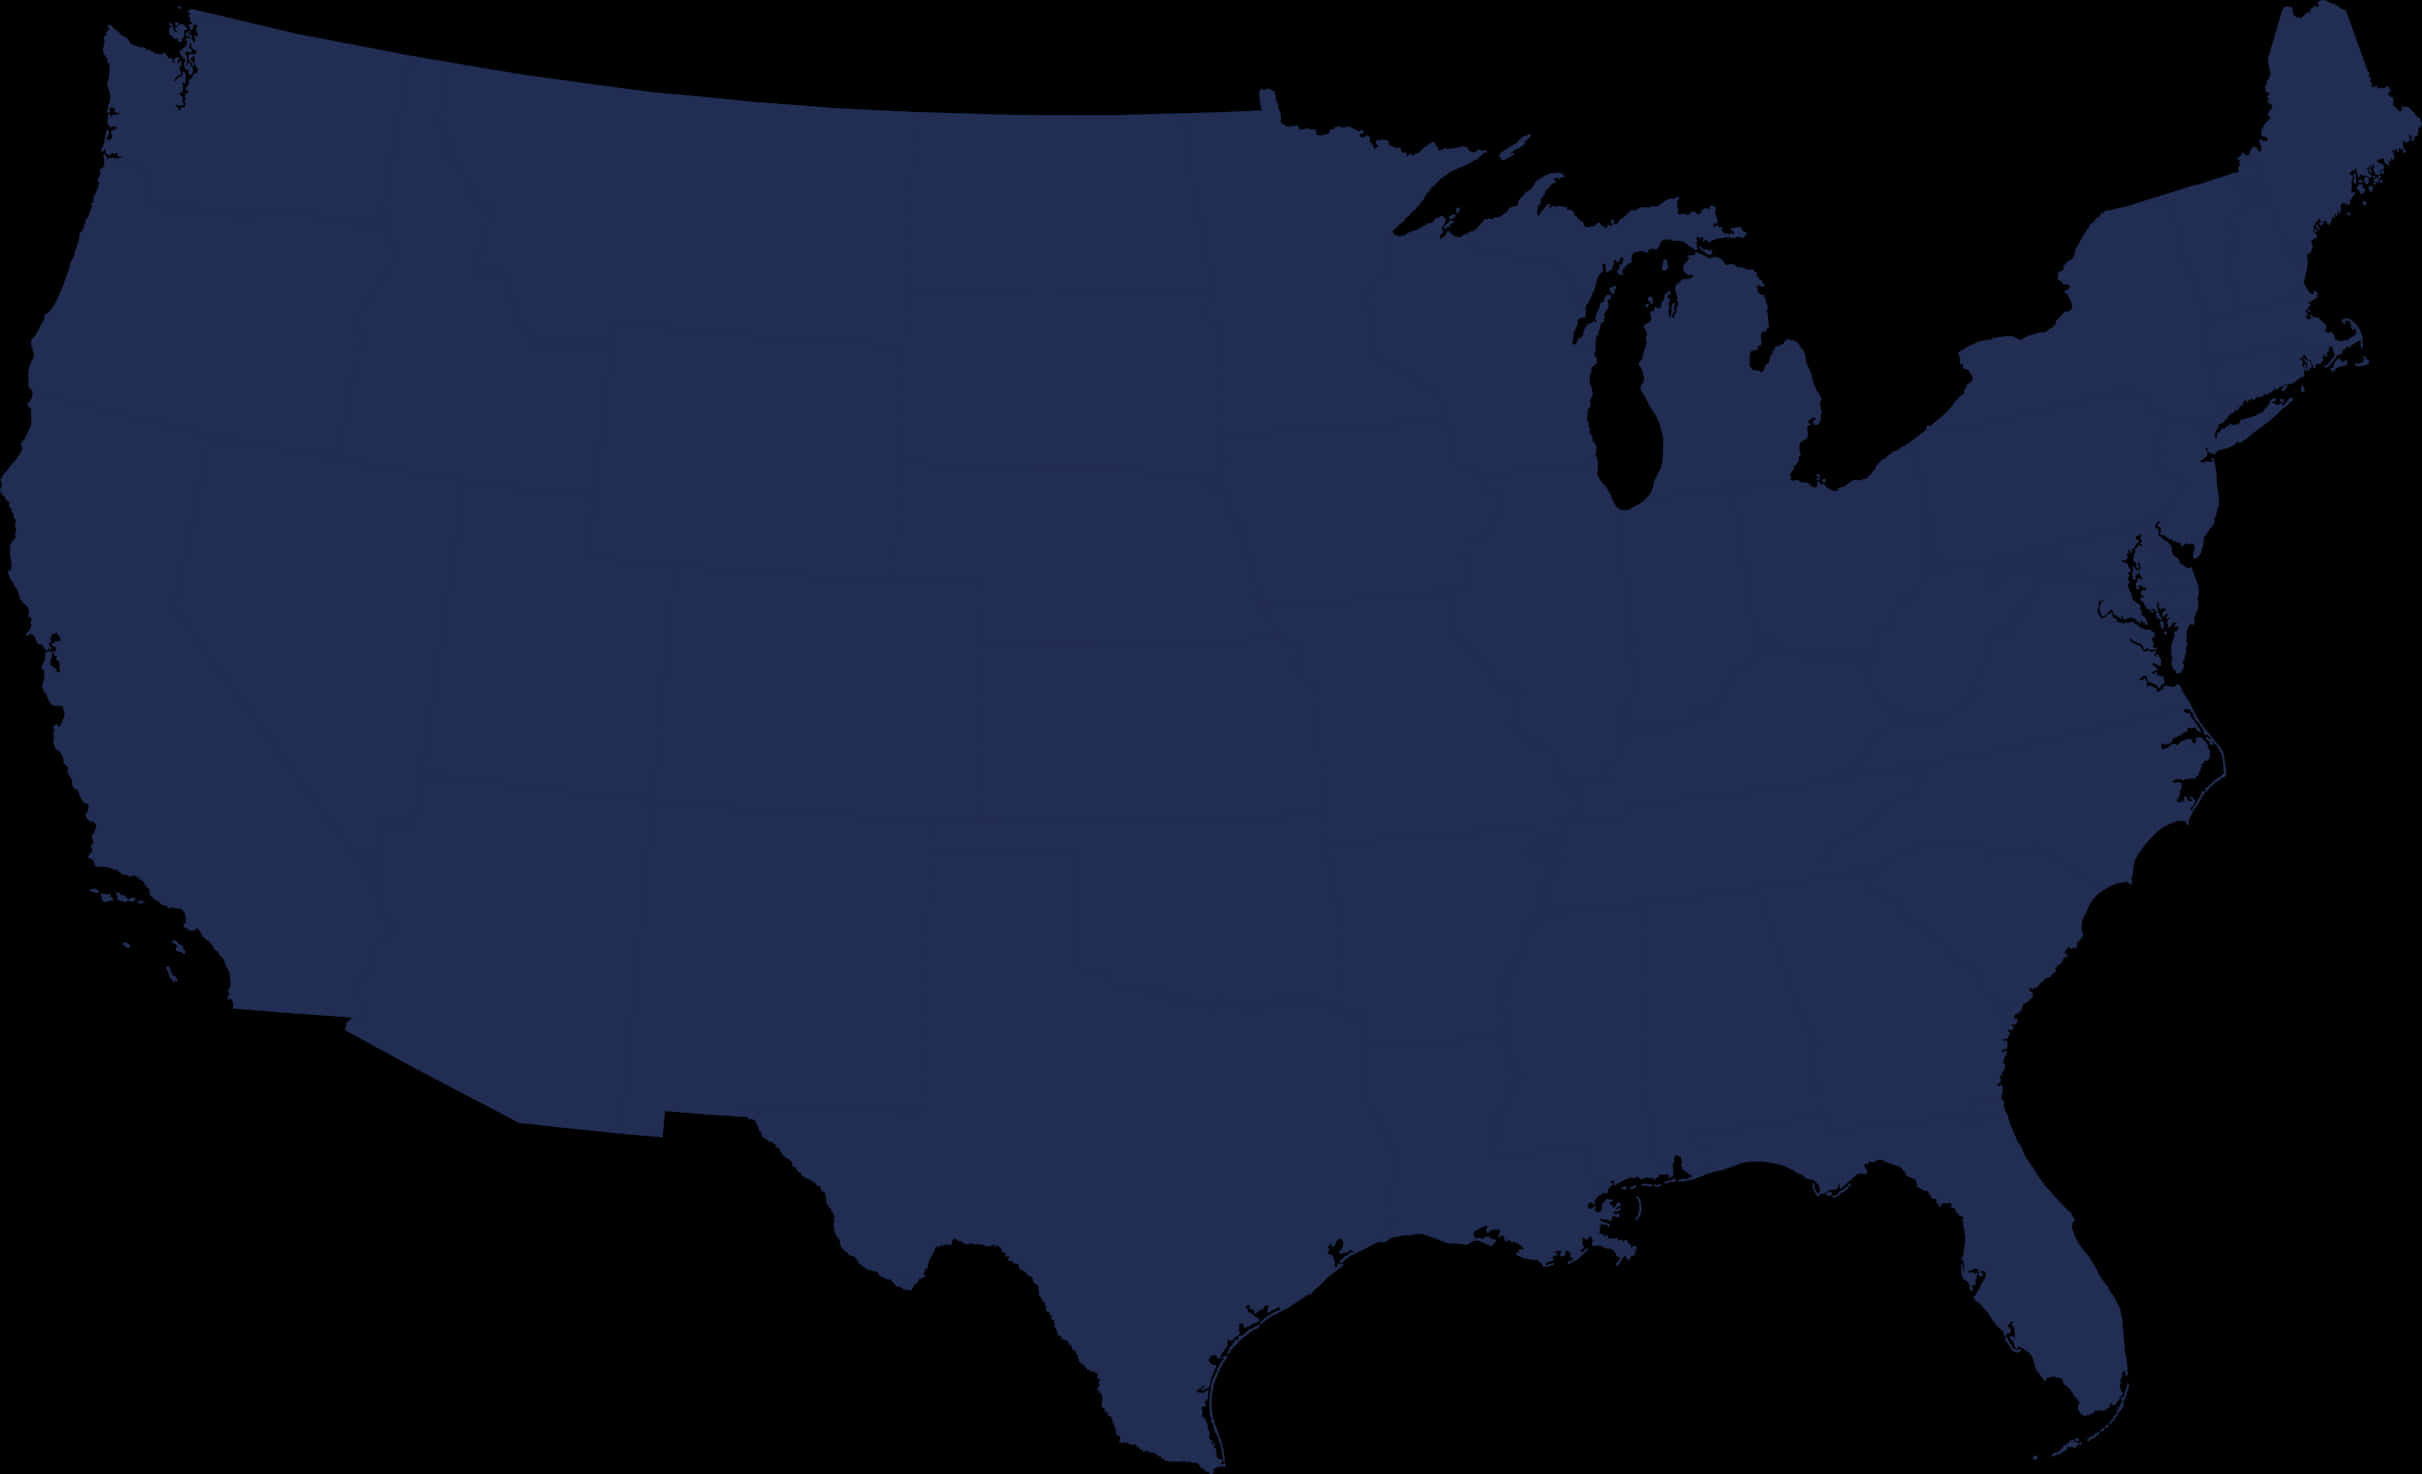 United States Silhouette Map